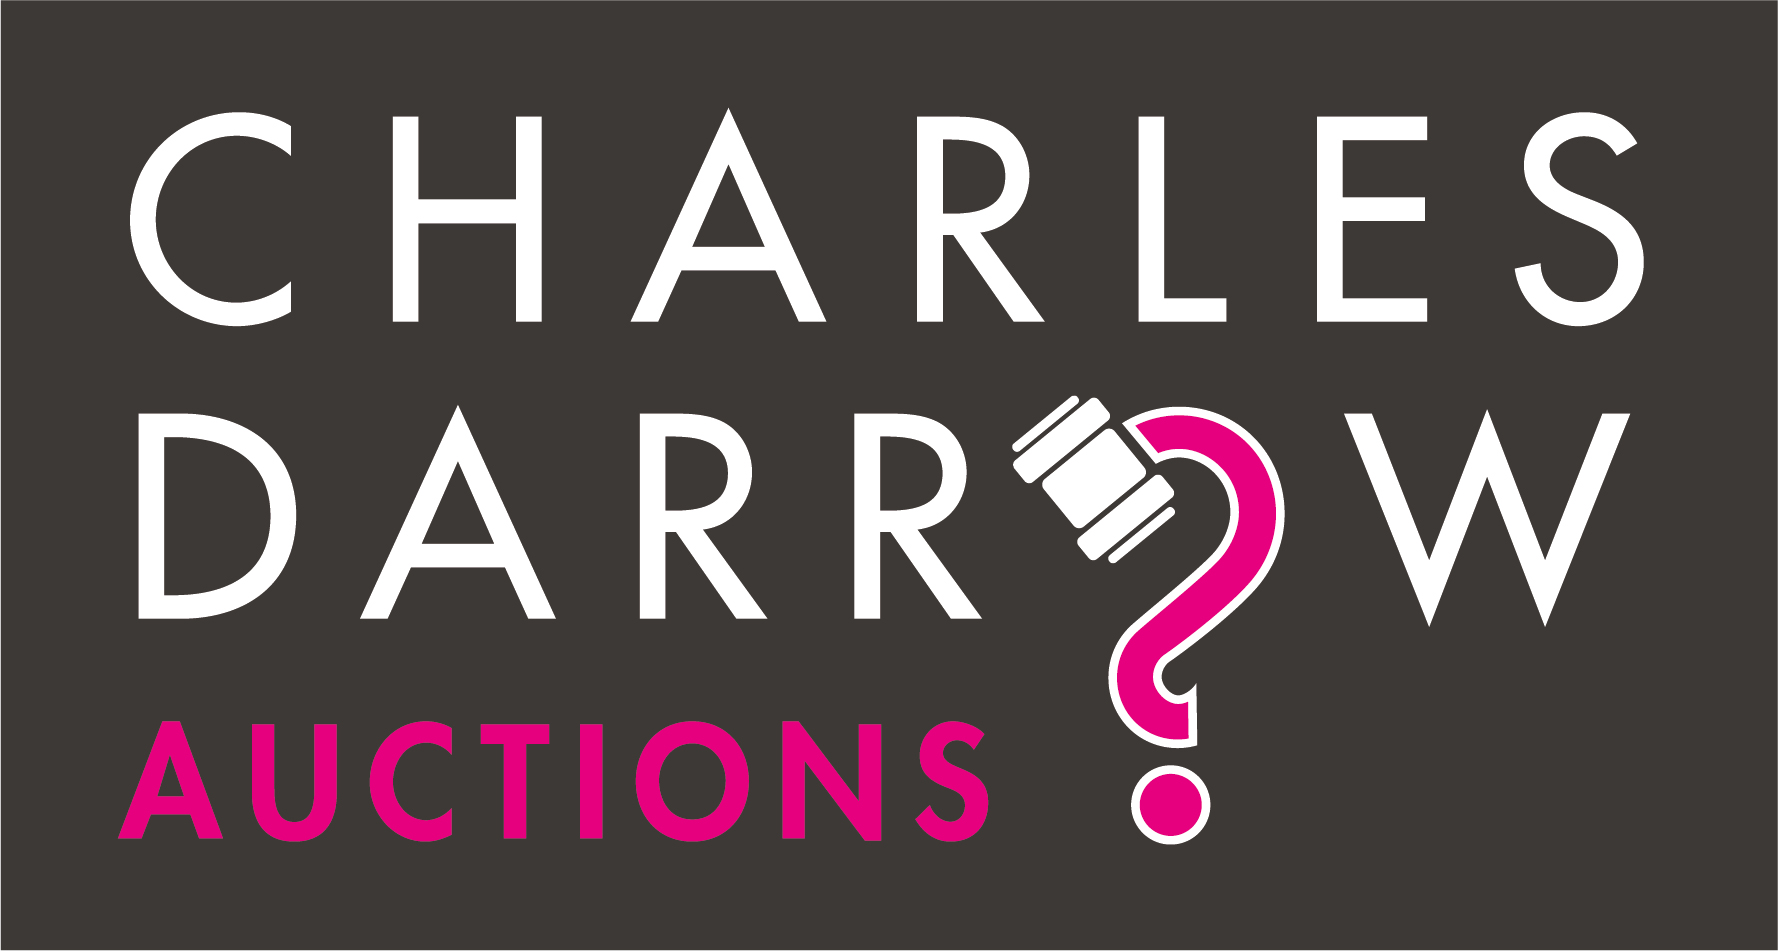 Commercial Property Auctions | Charles Darrow